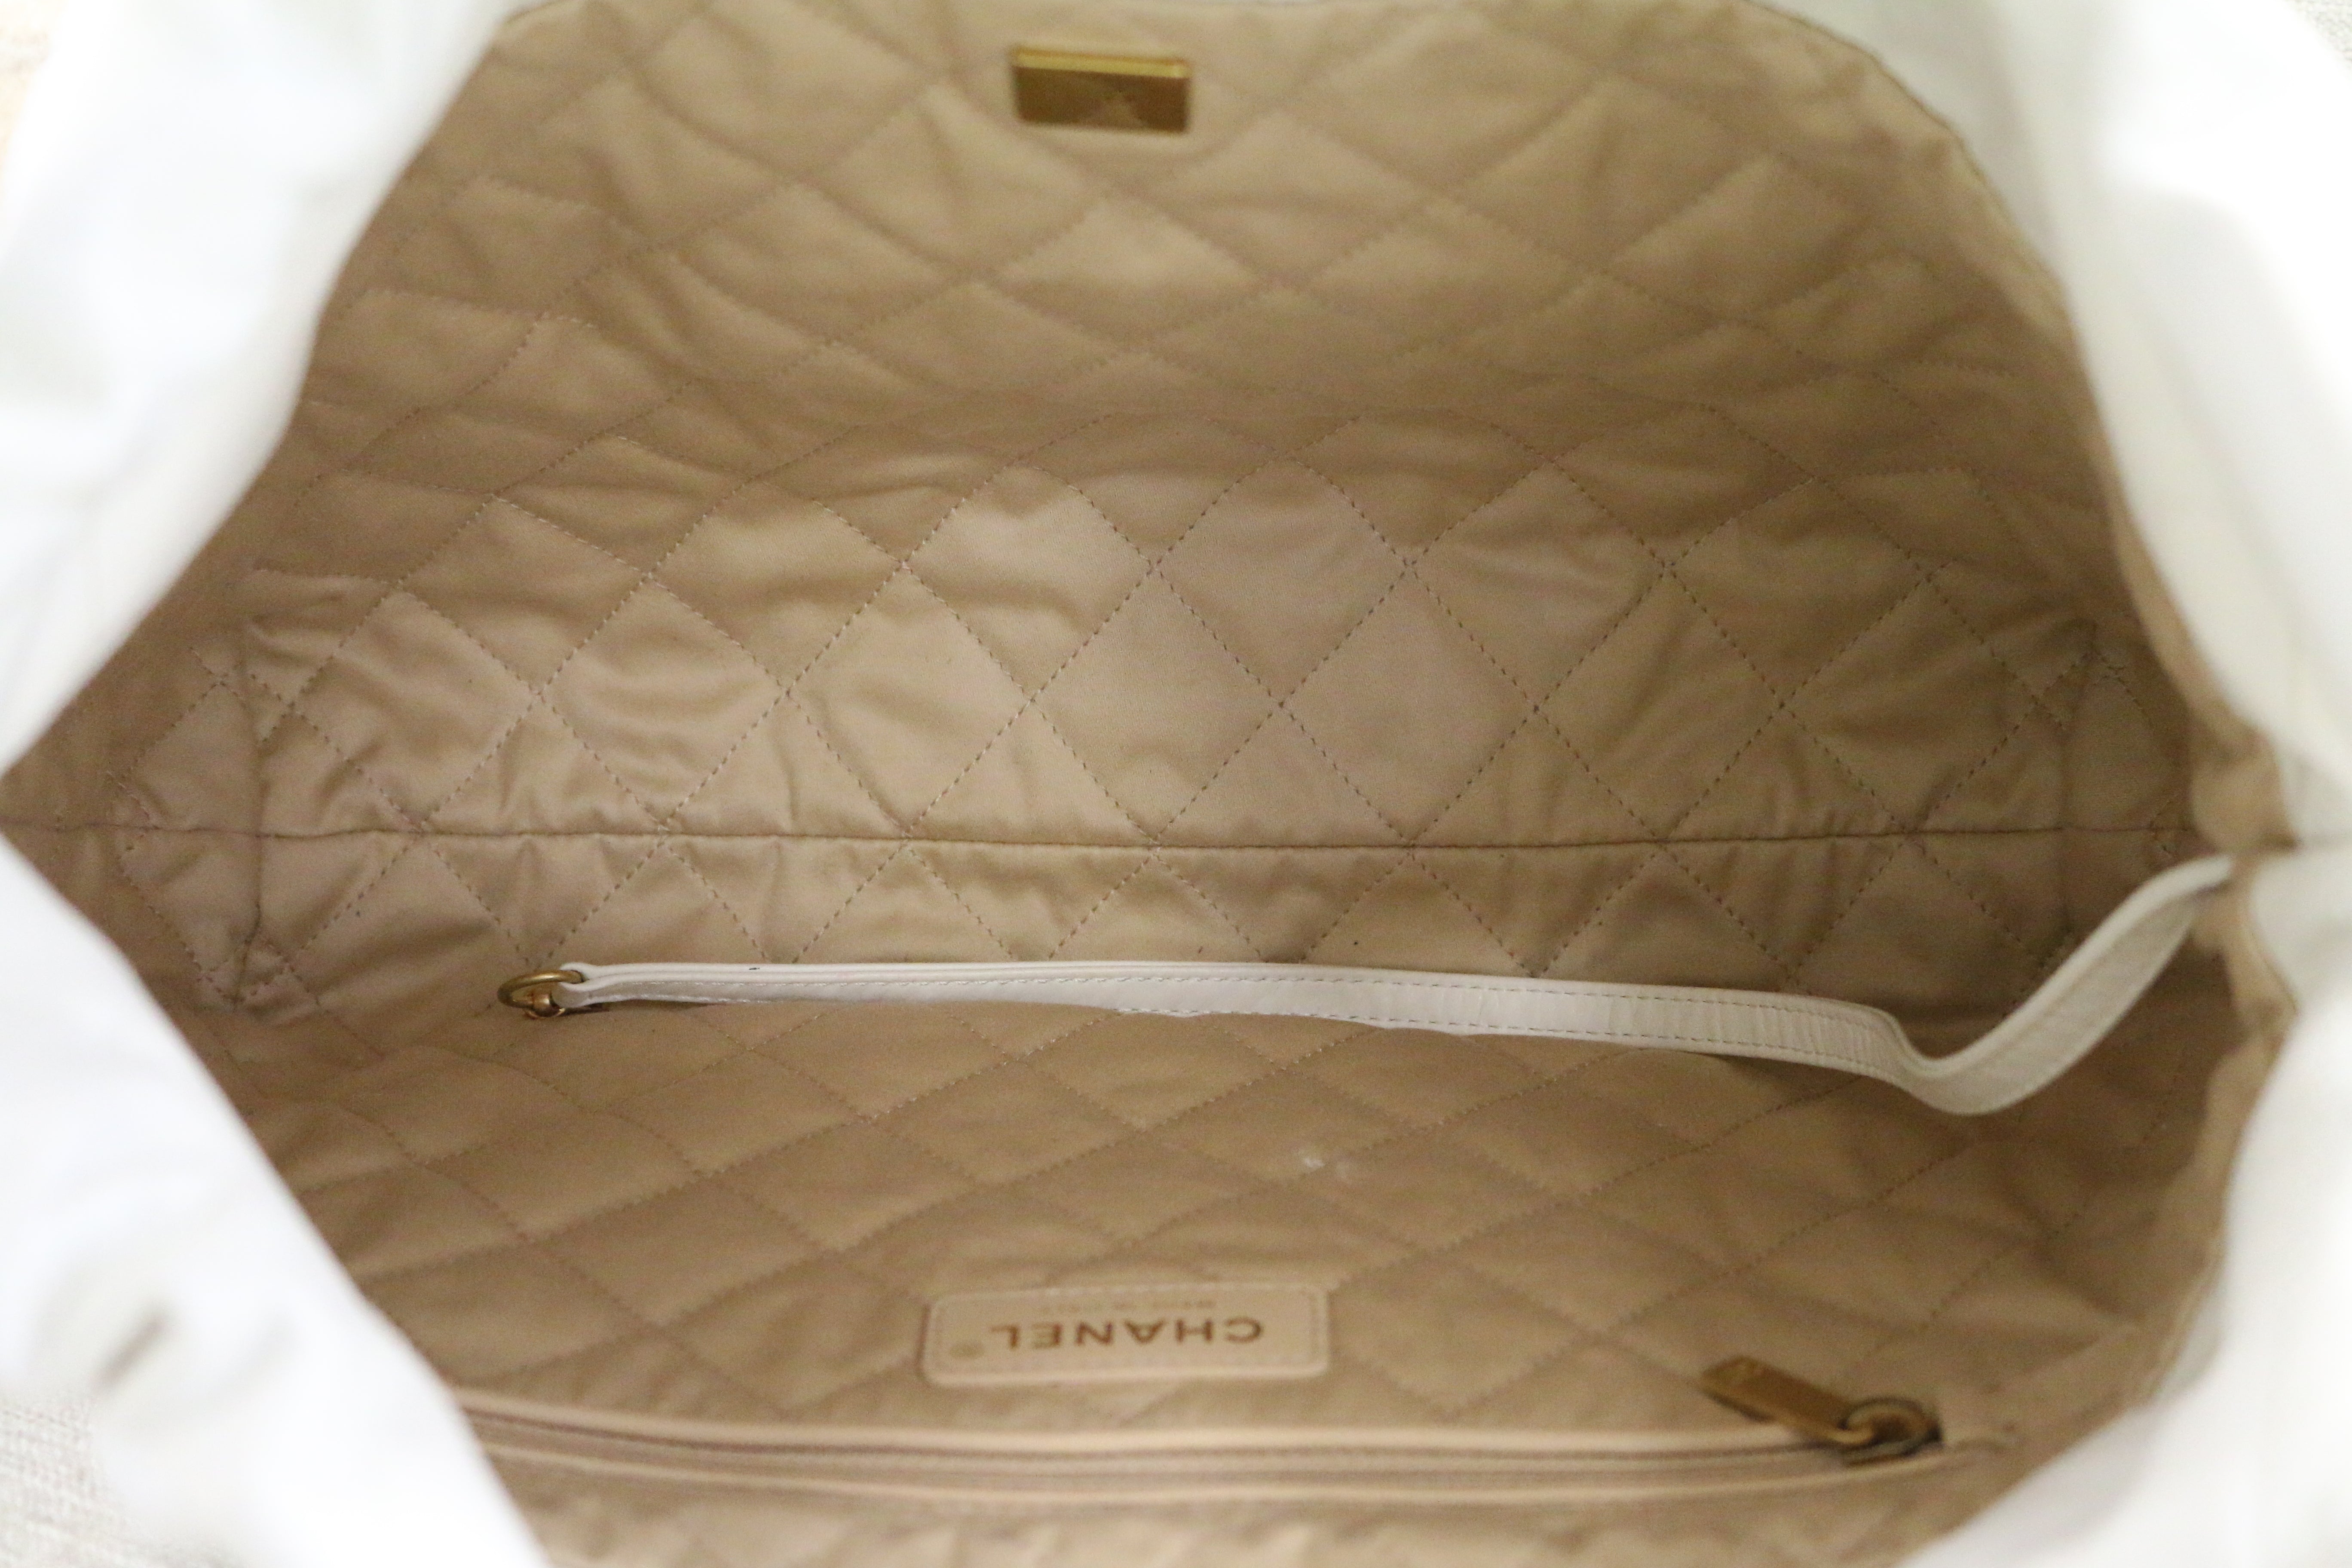 Chanel - Authenticated Chanel 22 Handbag - Leather White Plain for Women, Very Good Condition